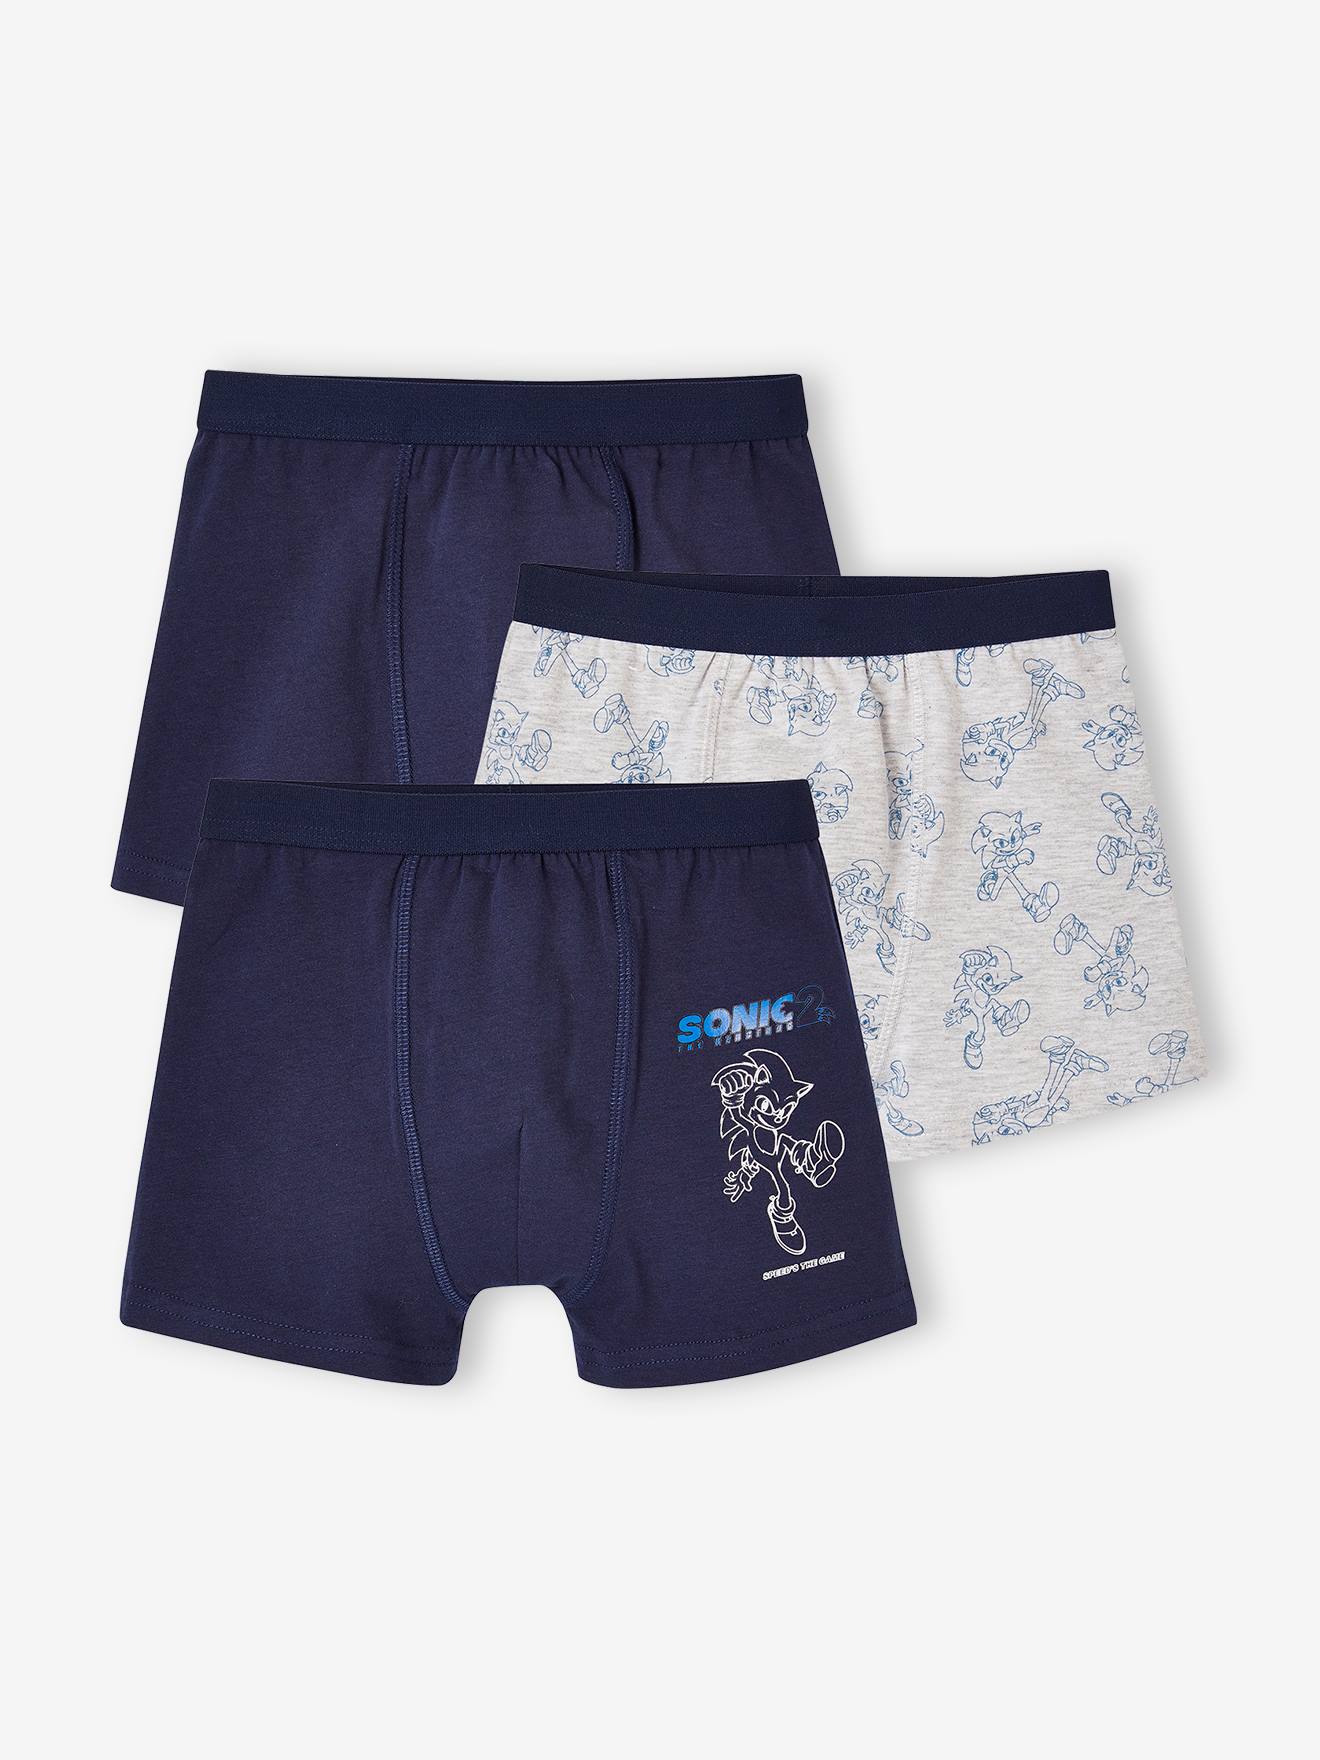 Pack of 3 Sonic(r) Boxers navy blue